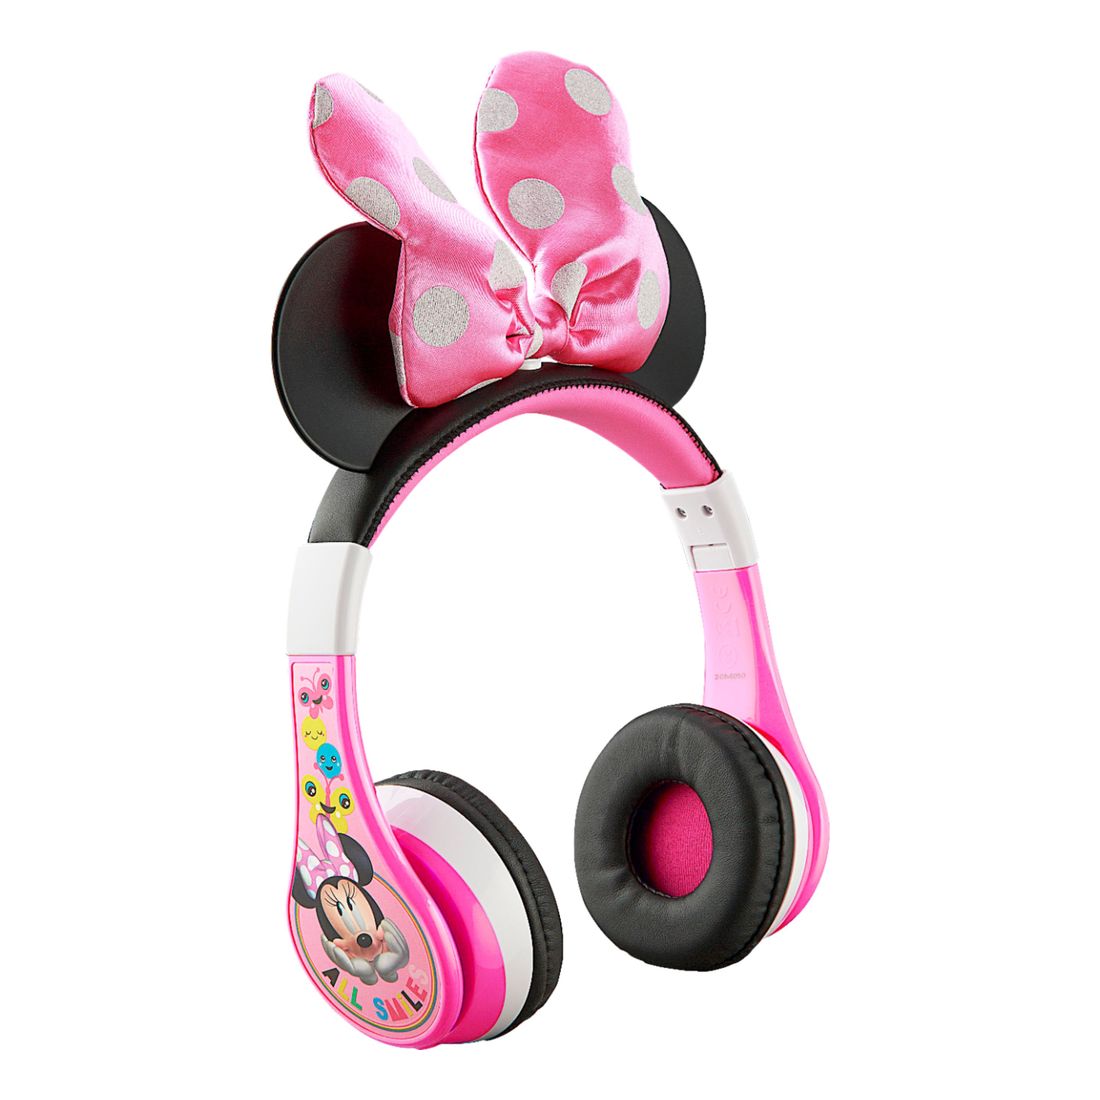 KidDesigns Minnie Mouse with Bow and Mini Ears Kids Headphones - Pink